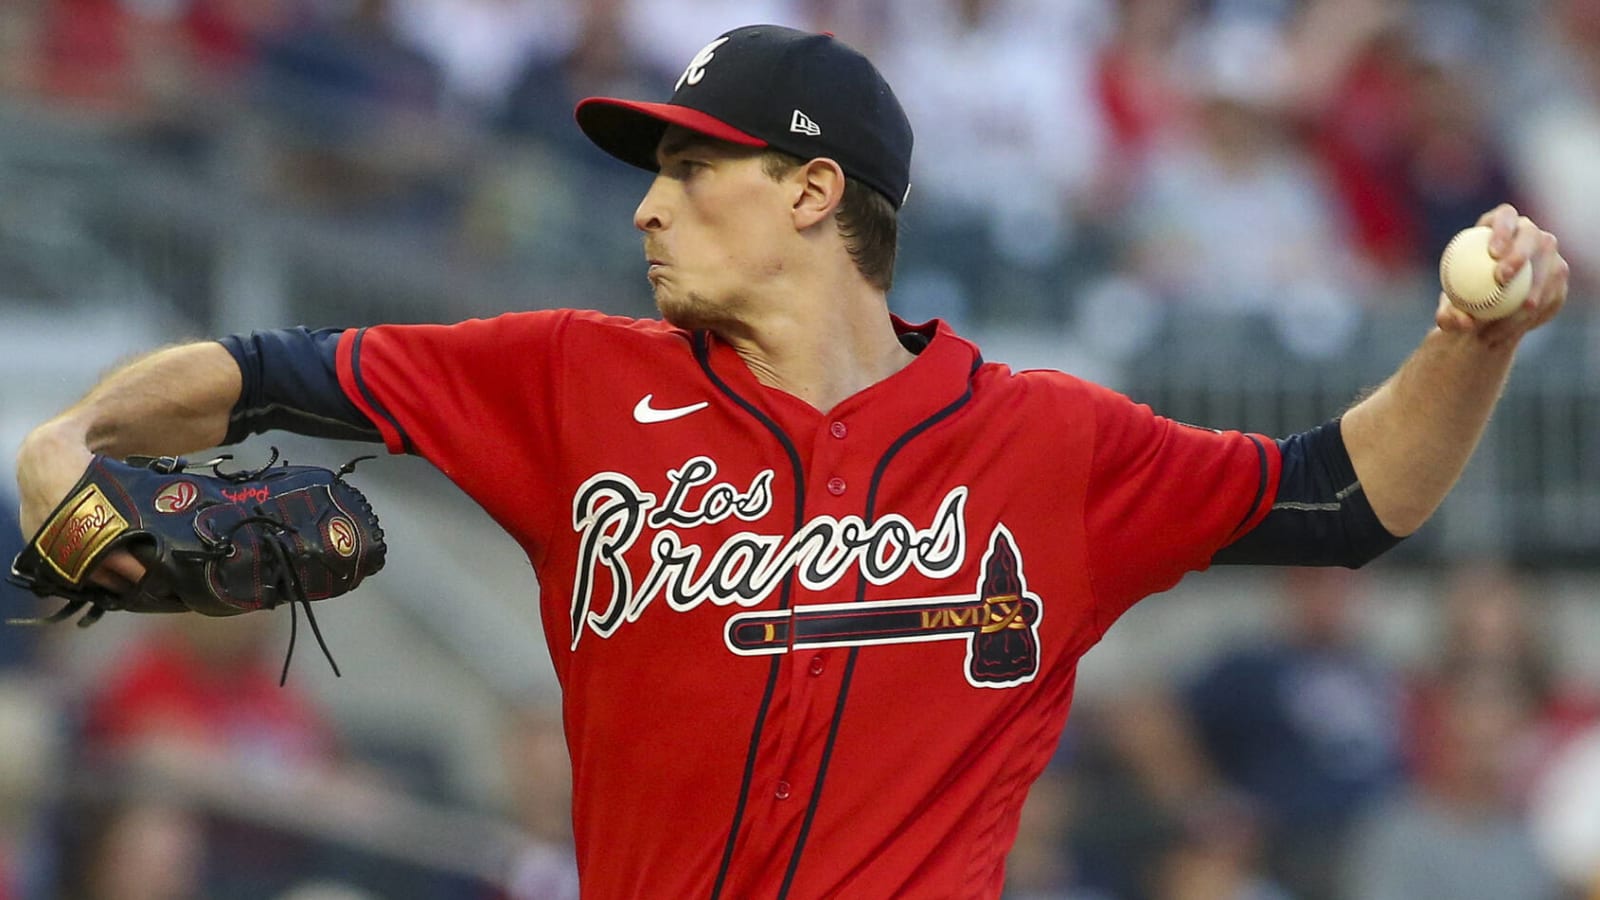 Max Fried says he's not angry over arbitration, is open to